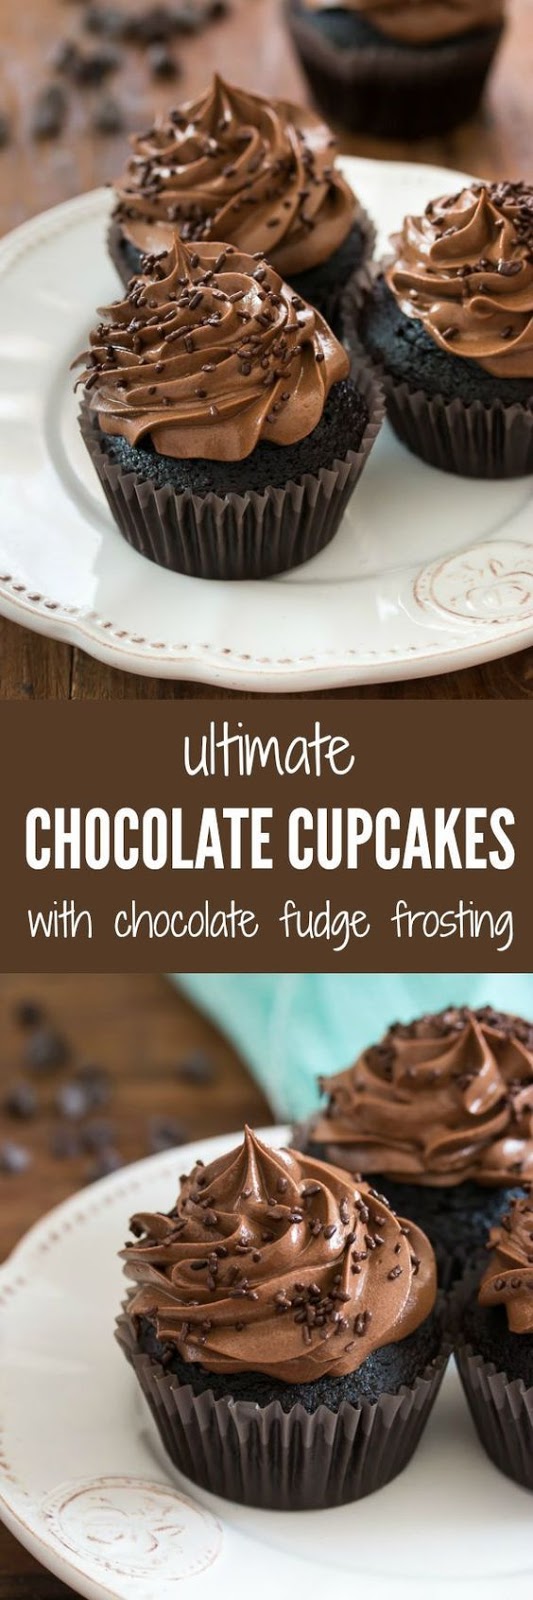 Ultimate Chocolate Cupcakes - Home Inspiration and DIY Crafts Ideas